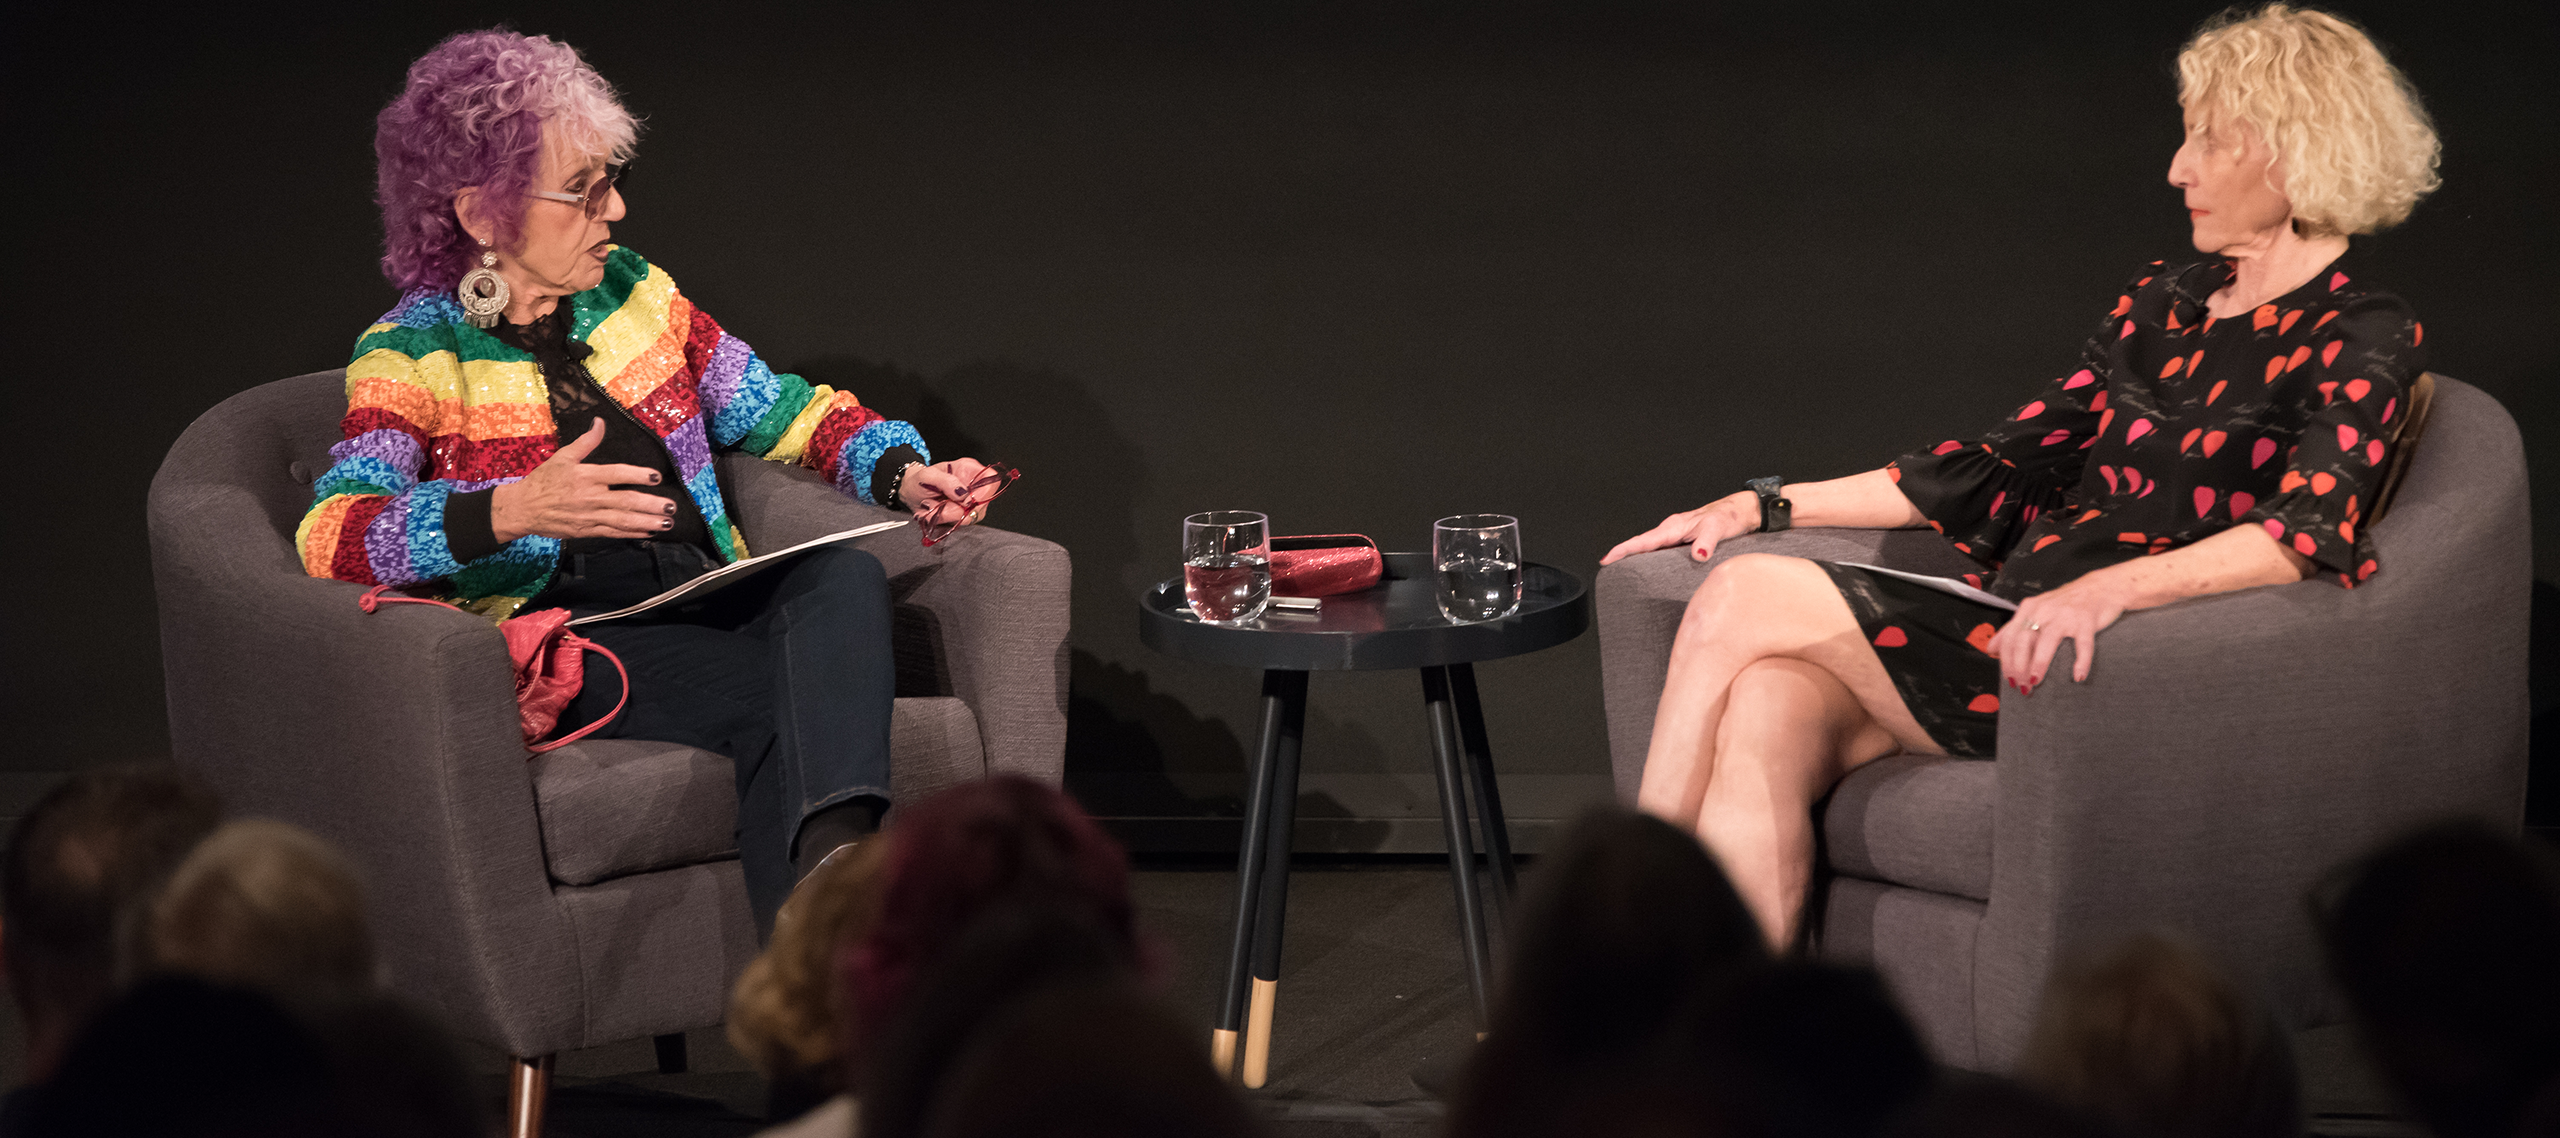 Judy Chicago and philosopher Martha Nussbaum in conversation on the occasion of Chicago's monograph launch; Photo by Sancha McBurnie